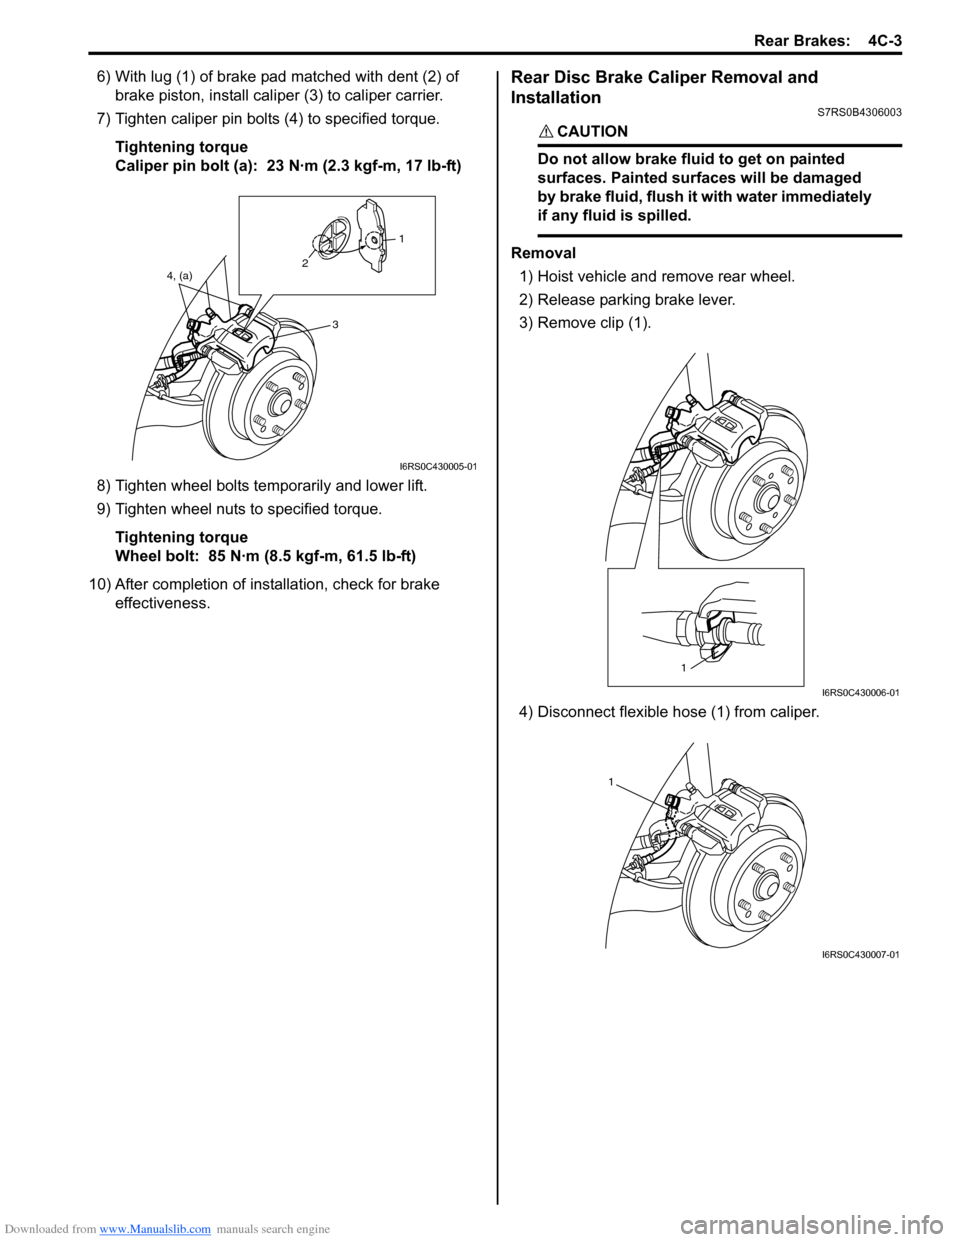 SUZUKI SWIFT 2008 2.G Service Owners Manual Downloaded from www.Manualslib.com manuals search engine Rear Brakes:  4C-3
6) With lug (1) of brake pad matched with dent (2) of brake piston, install caliper  (3) to caliper carrier.
7) Tighten cali